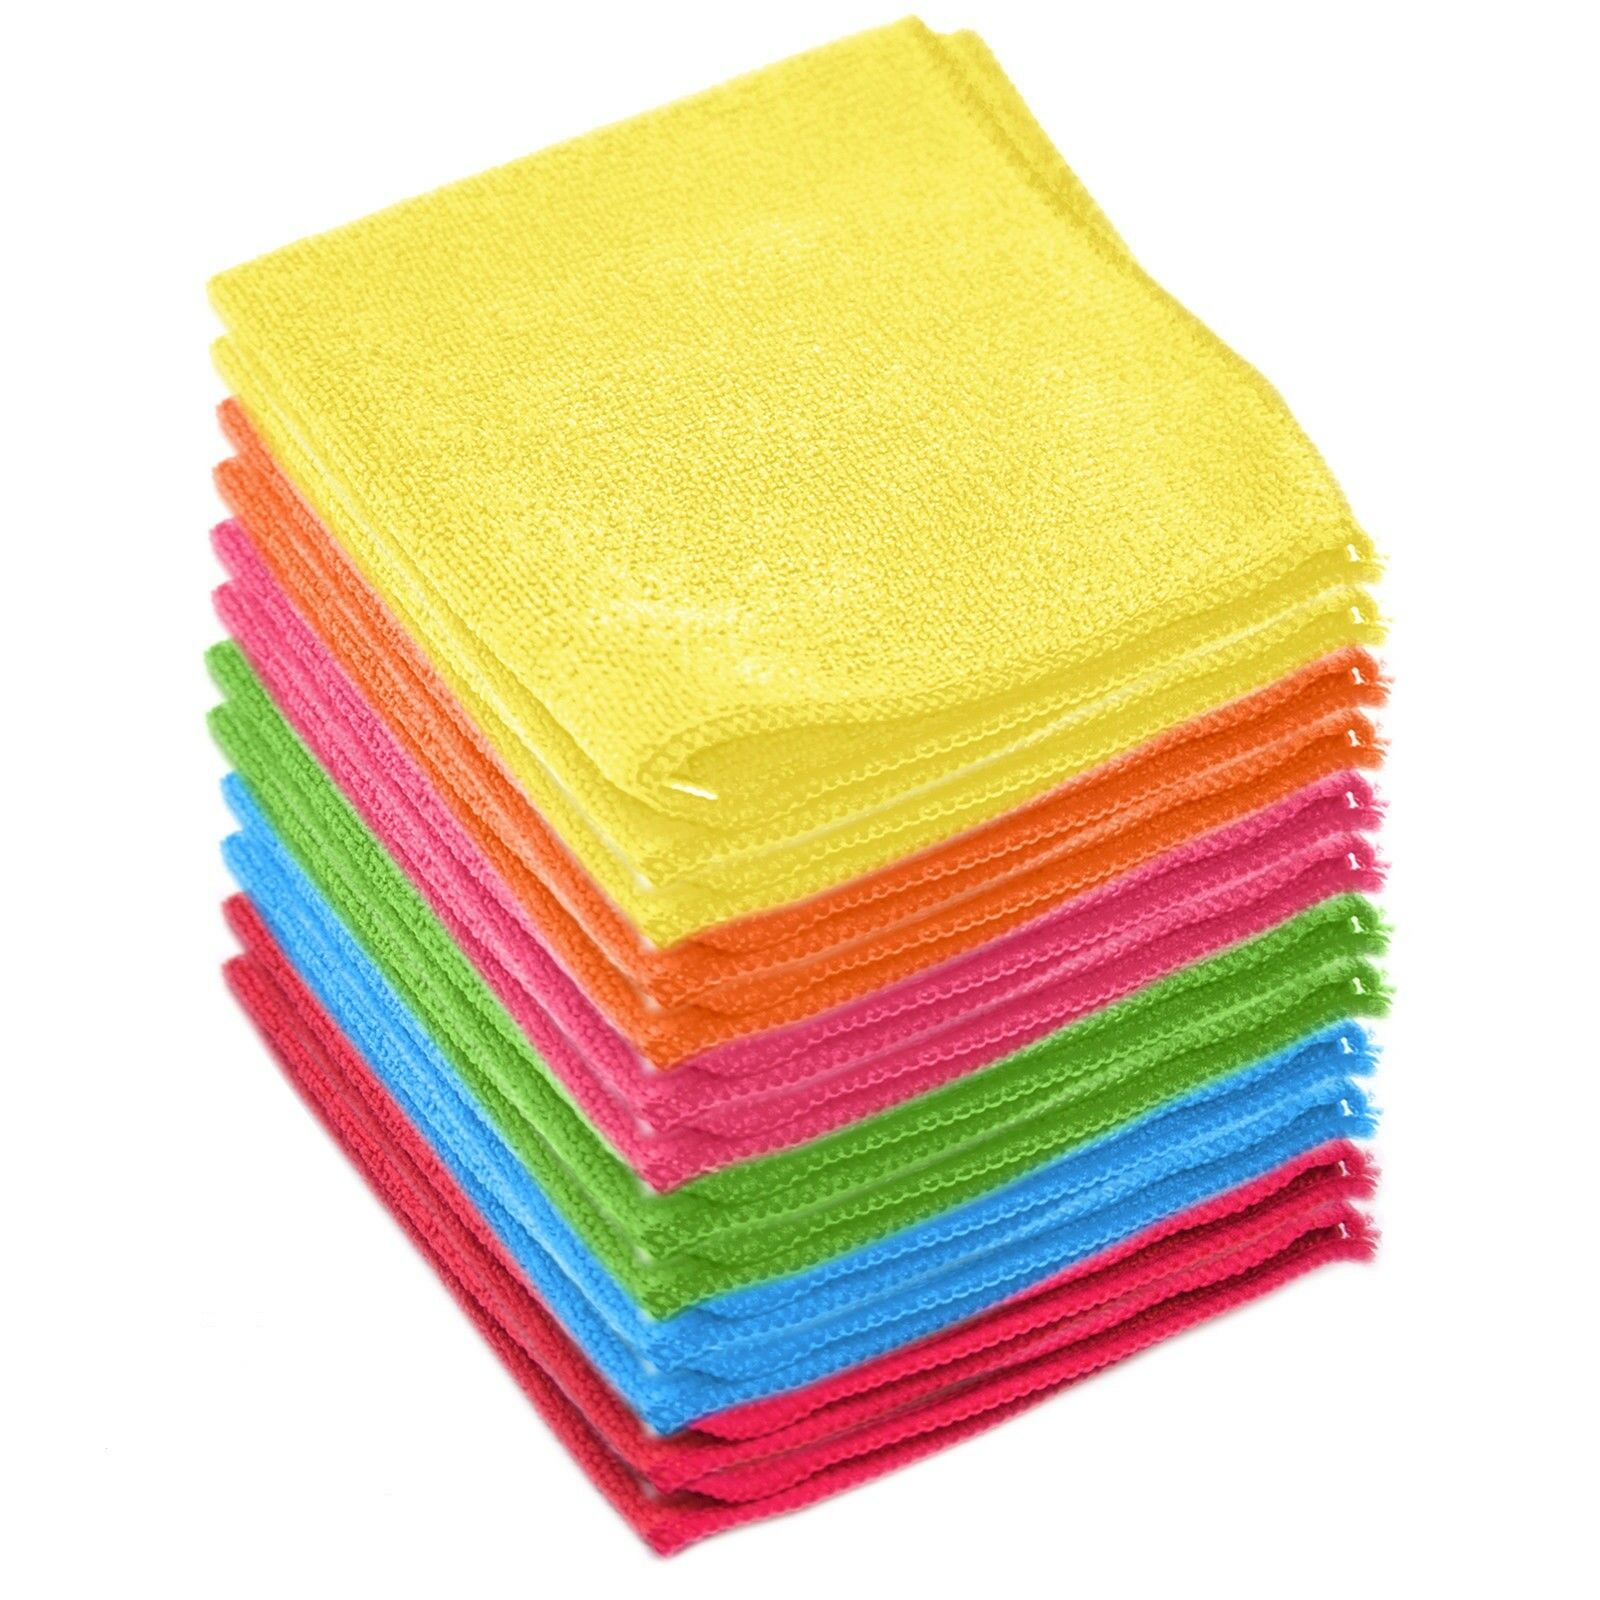 Microfiber Cleaning Cloth Towel Absorbent No Scratch Polishing Detailing Rags